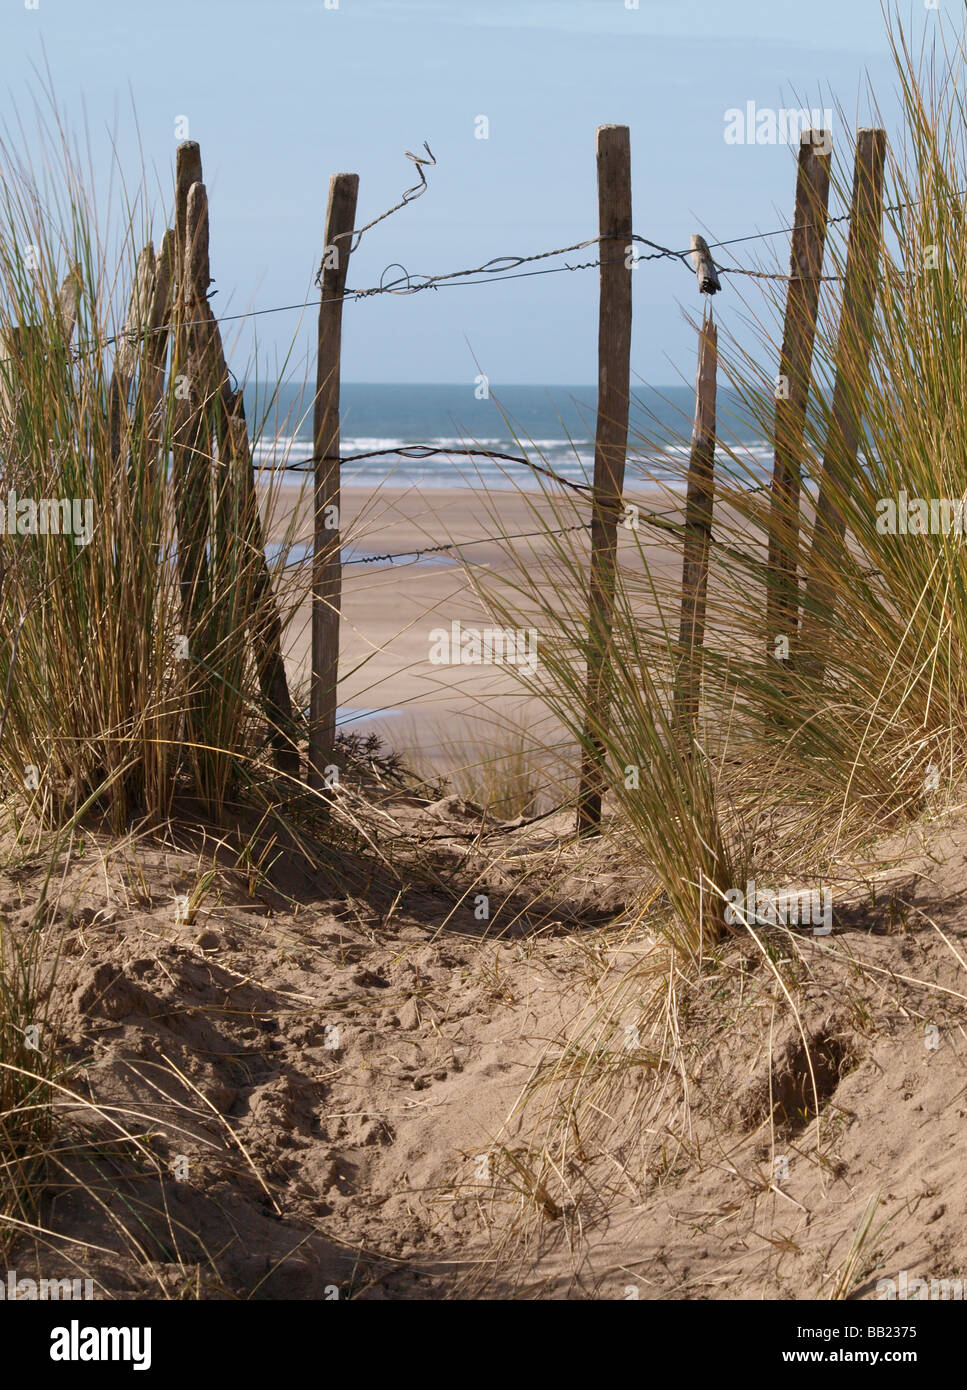 Old wooden fence in a sand dune beside the sea, with marrum grass growing  around it Stock Photo - Alamy